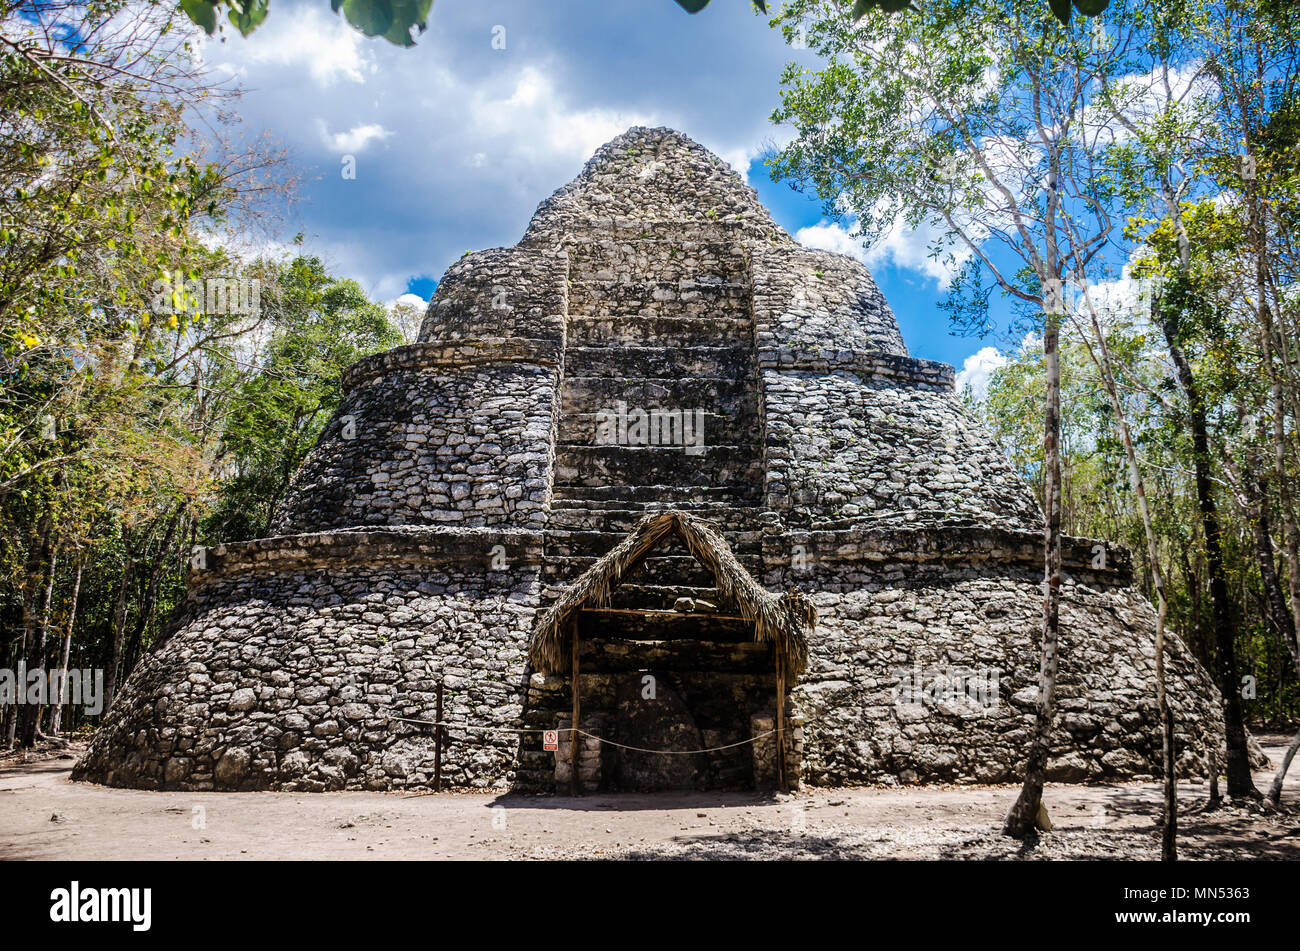 Ancient ruins and trees at the archaeological site of Coba Stock Photo